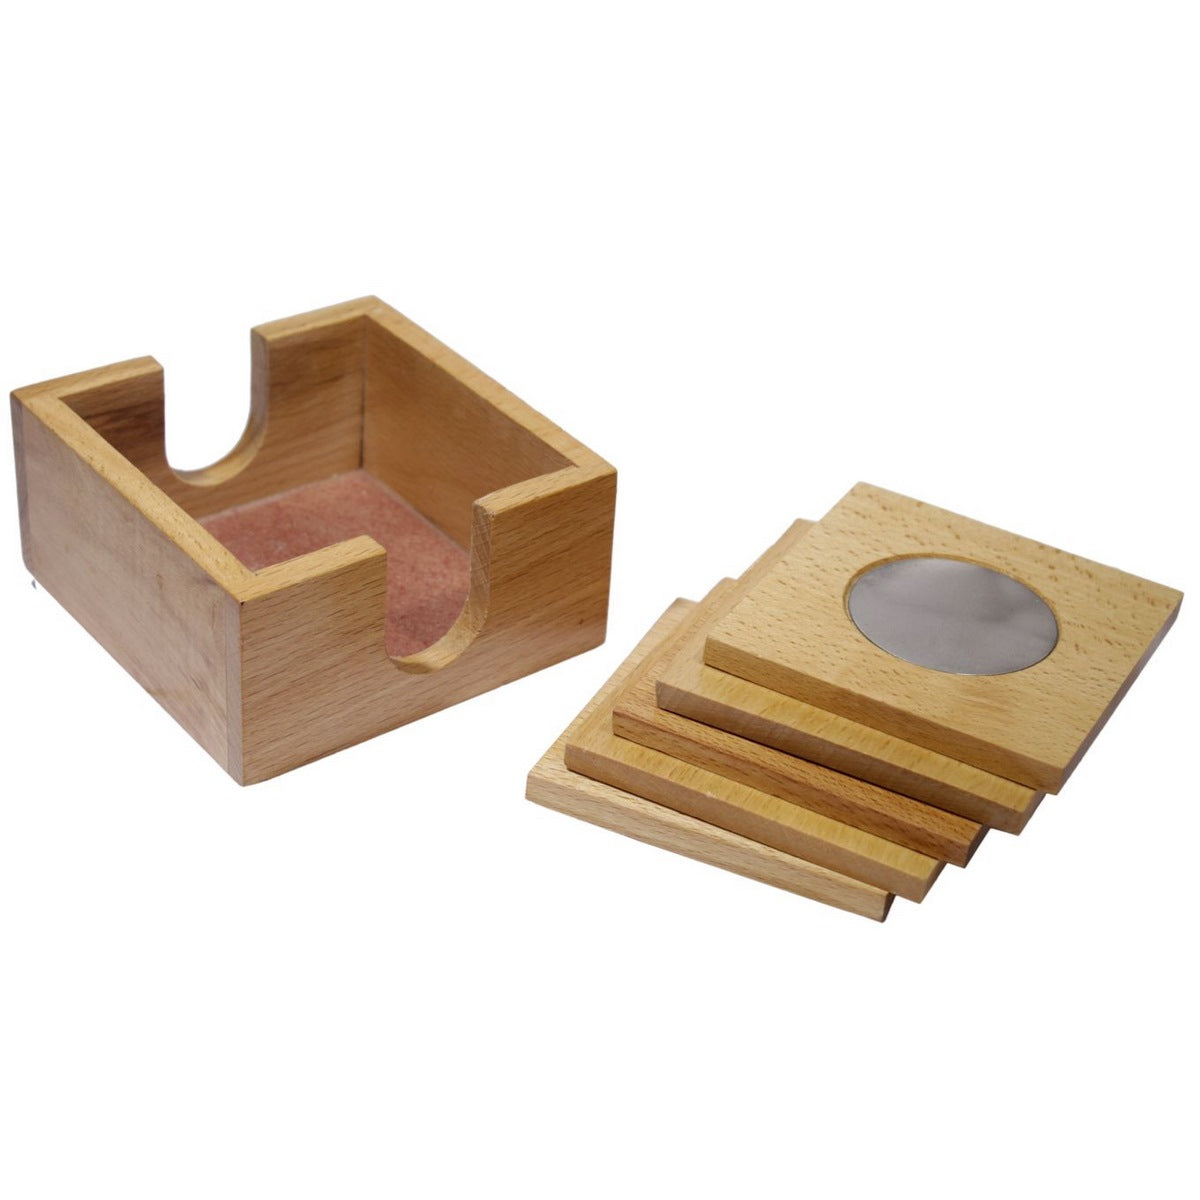 Set of 6 Brown Square Wooden Tea Coaster - For Corporate Gifting, Office Use, Personal Use, Return Gift JATC1055S